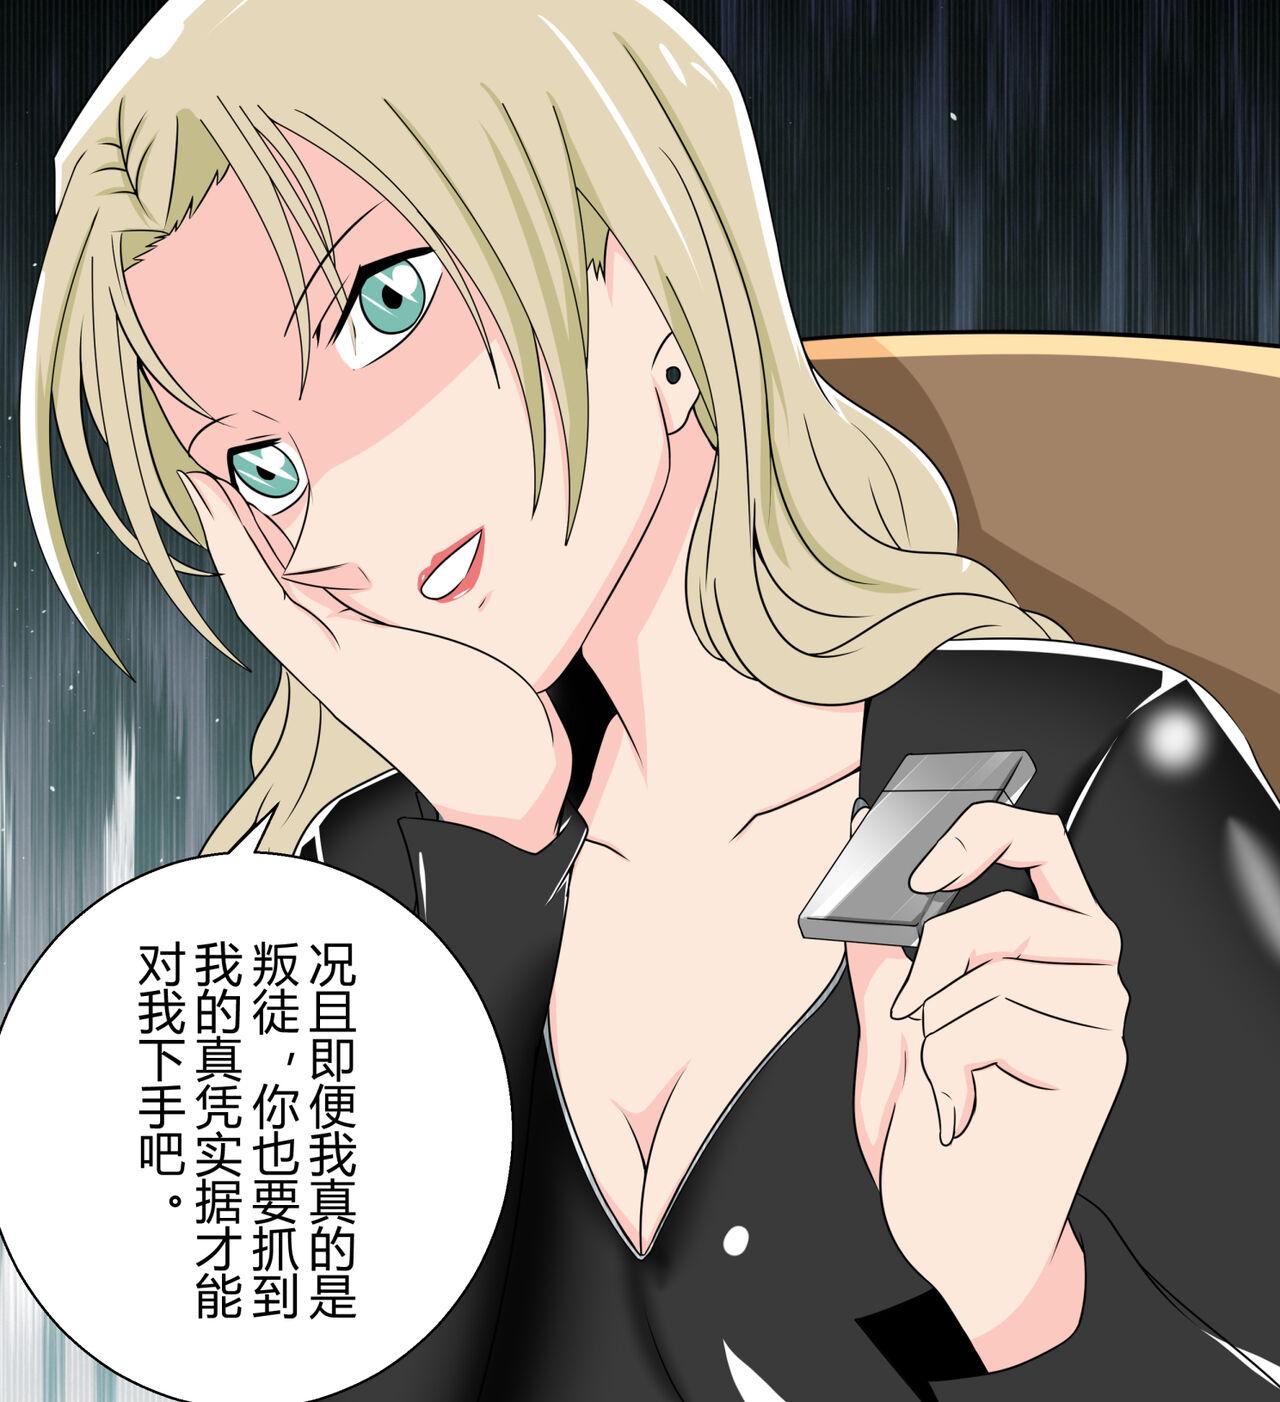 Vermouth kidnapping case 3